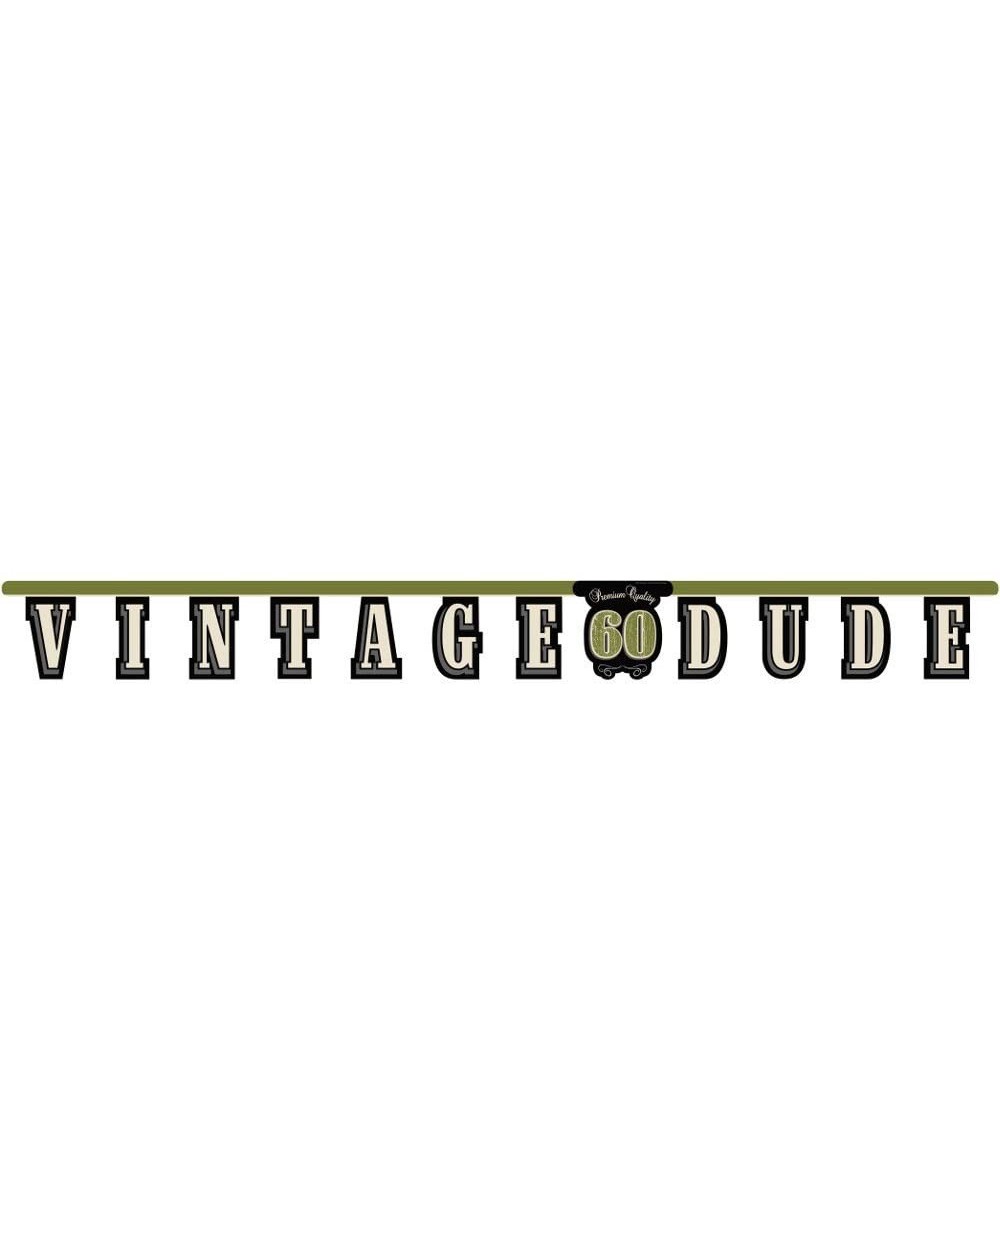 Banners & Garlands Vintage Dude 60th Birthday Jointed Letter Banner - C311CFI0EA7 $17.65